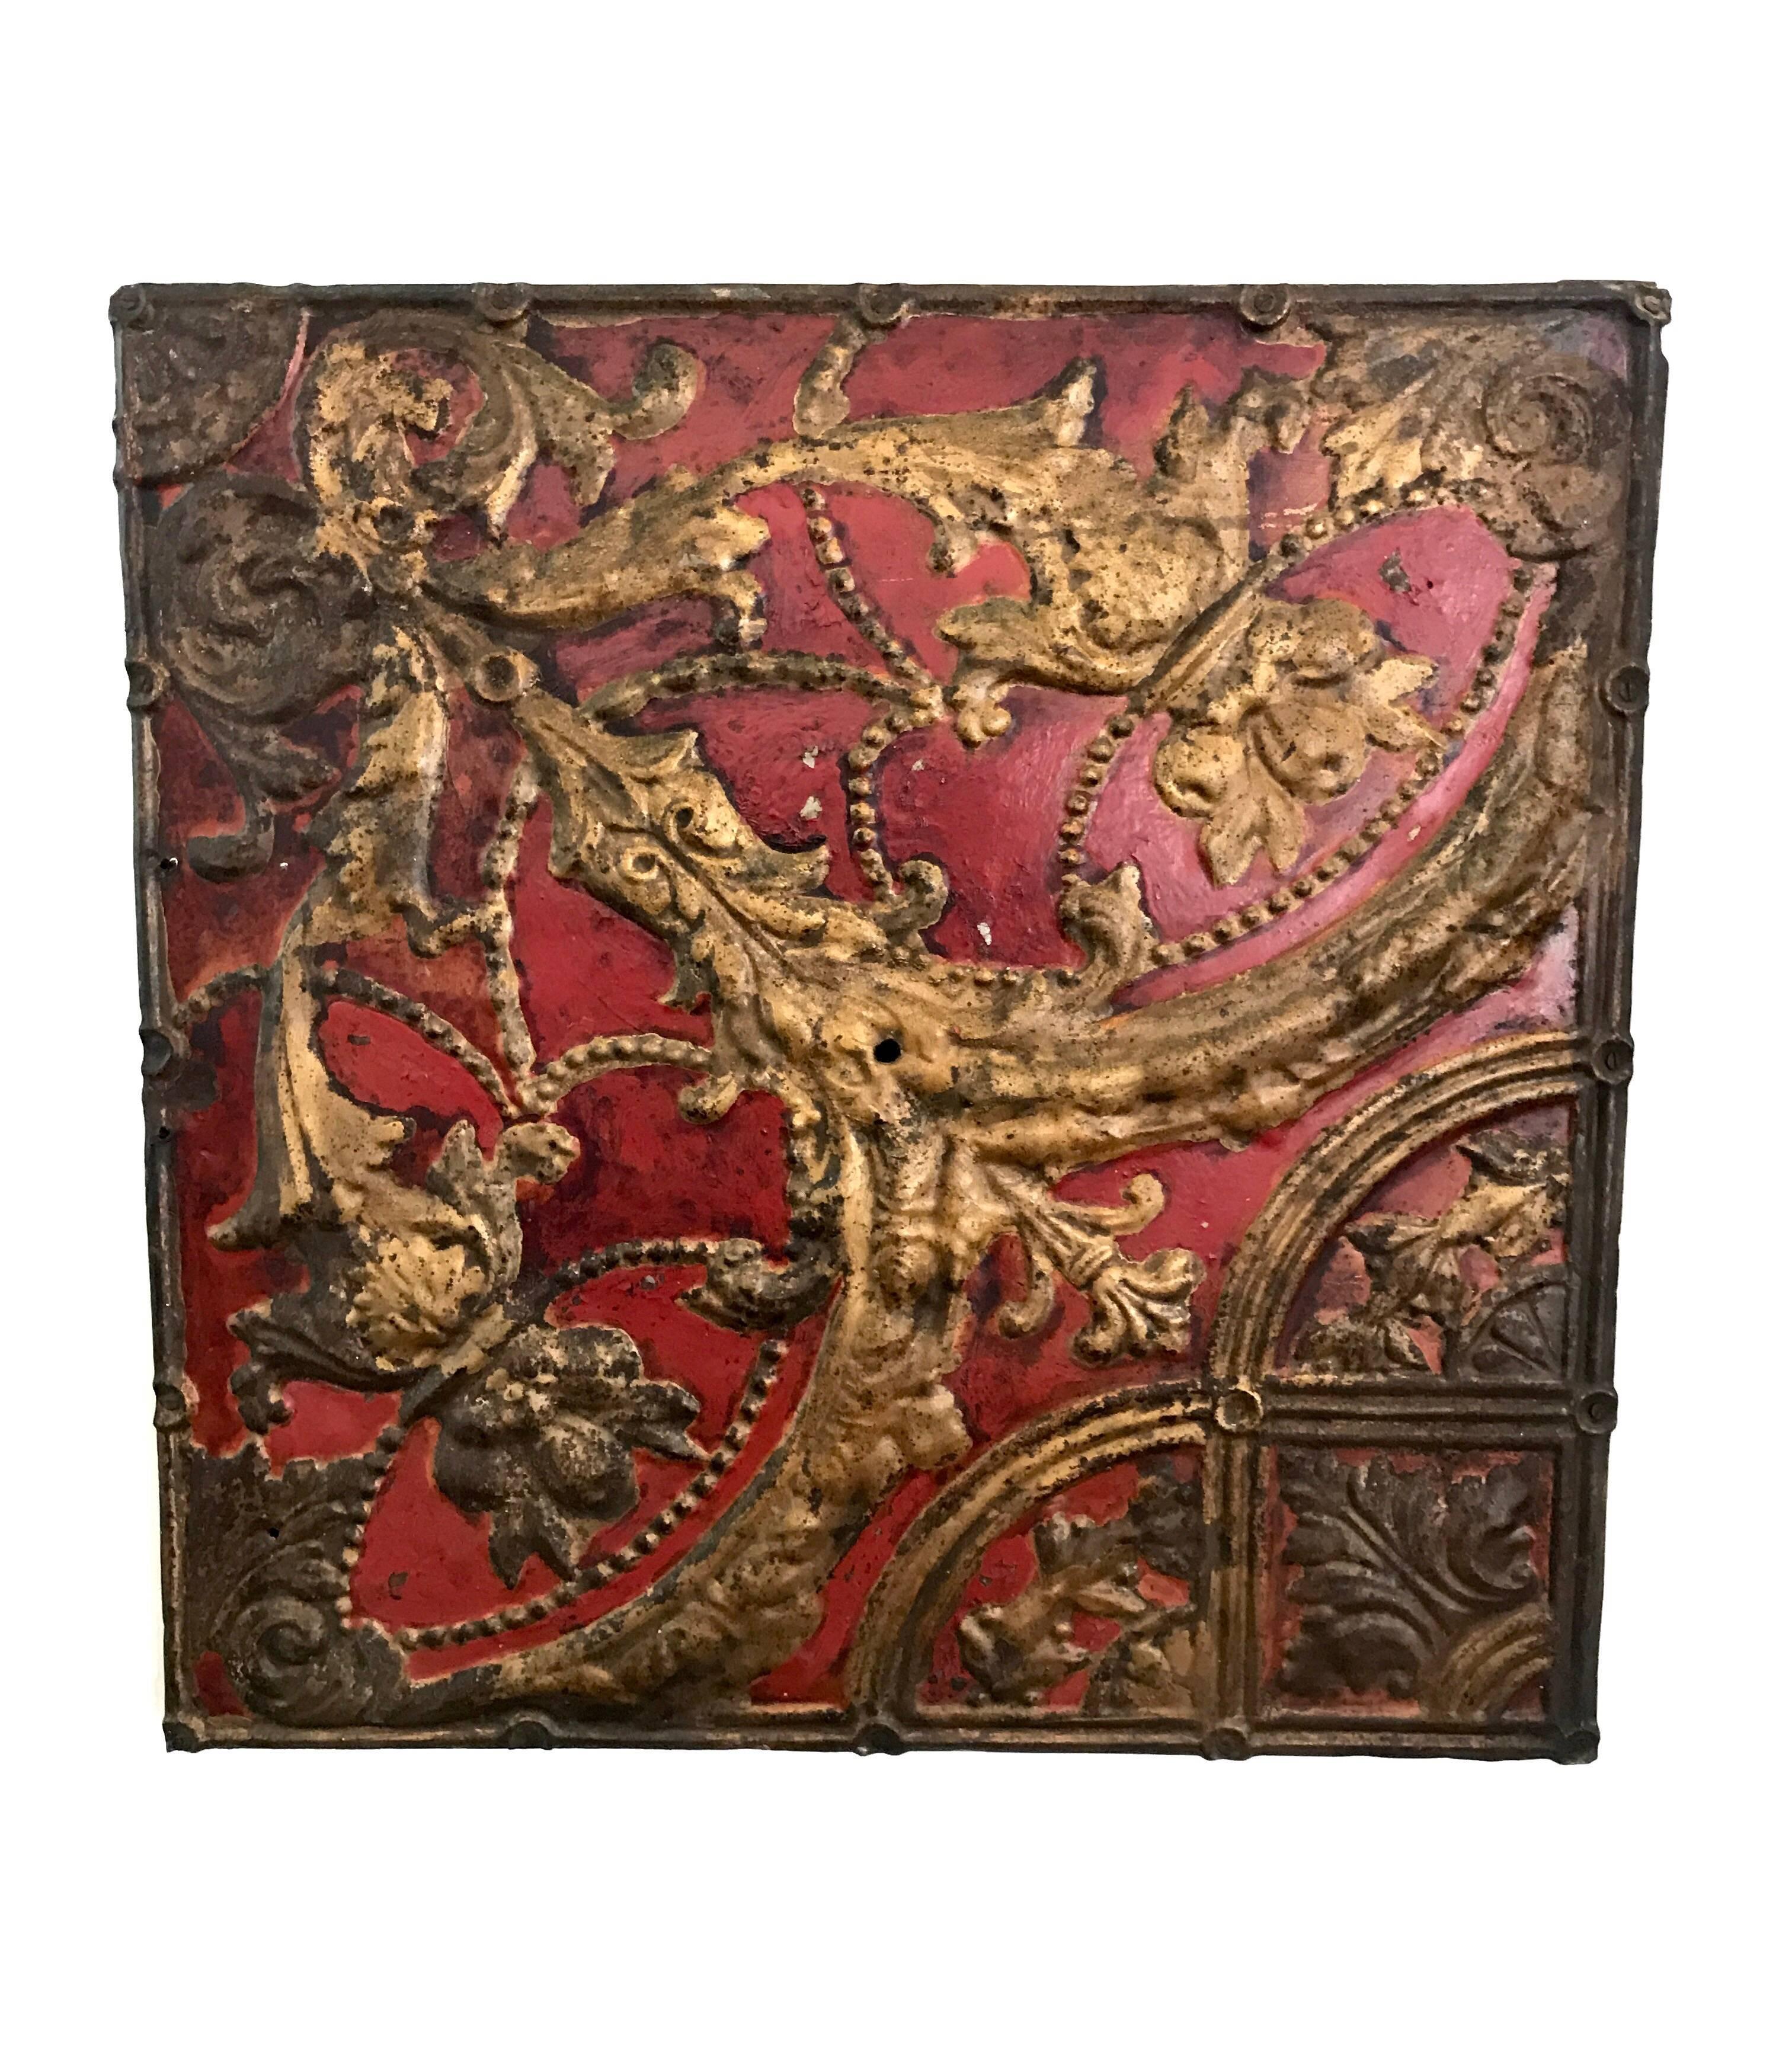 19th Century Antique Ceiling Tile as Decorative Wall Objet